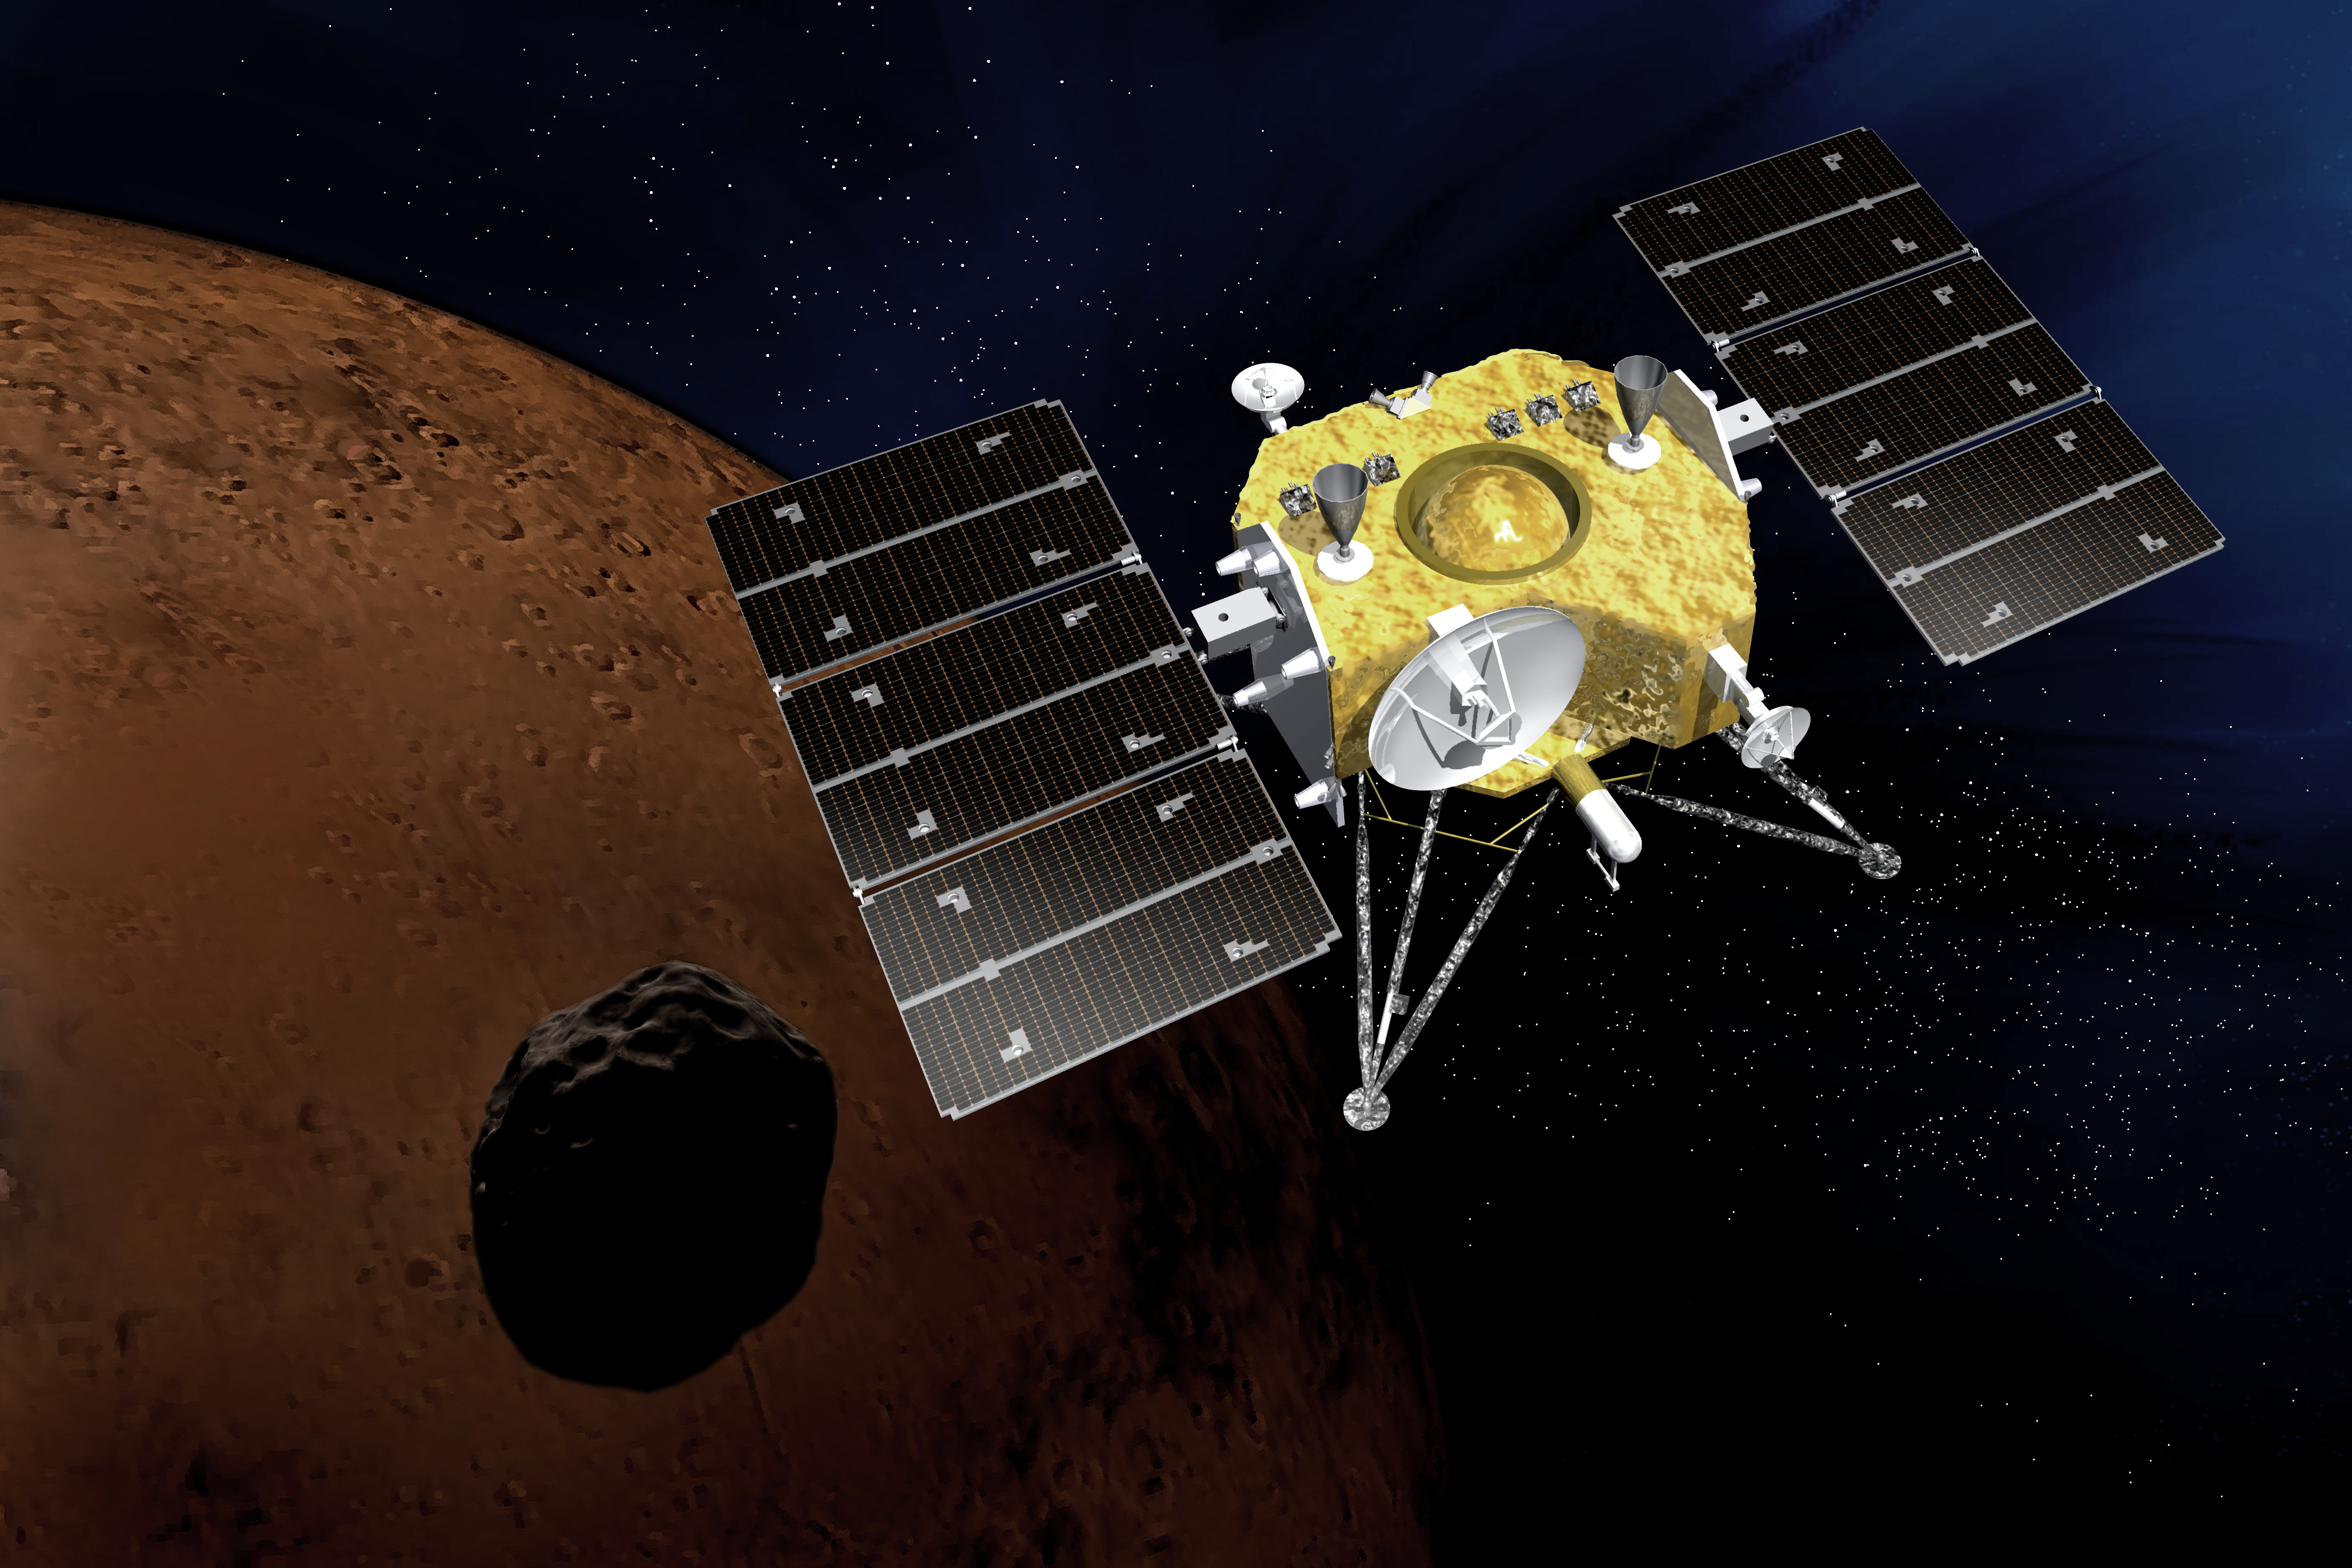 MMX spacecraft above Phobos and Mars/